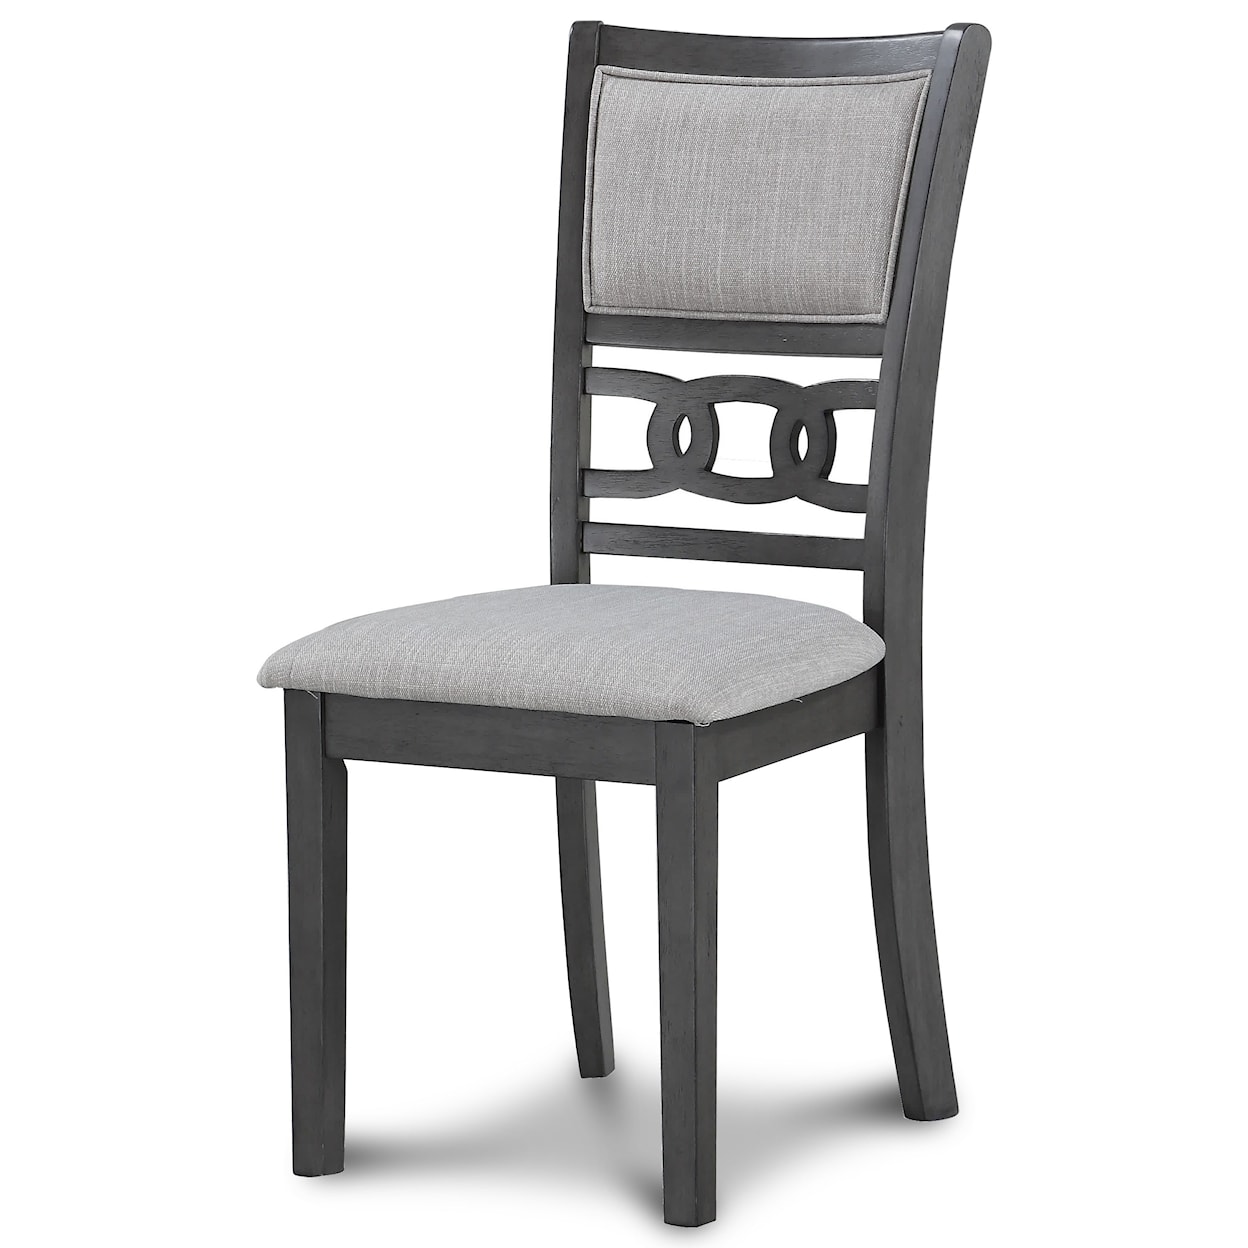 New Classic Furniture Gia Dining Table and Chair Set with 4 Chairs